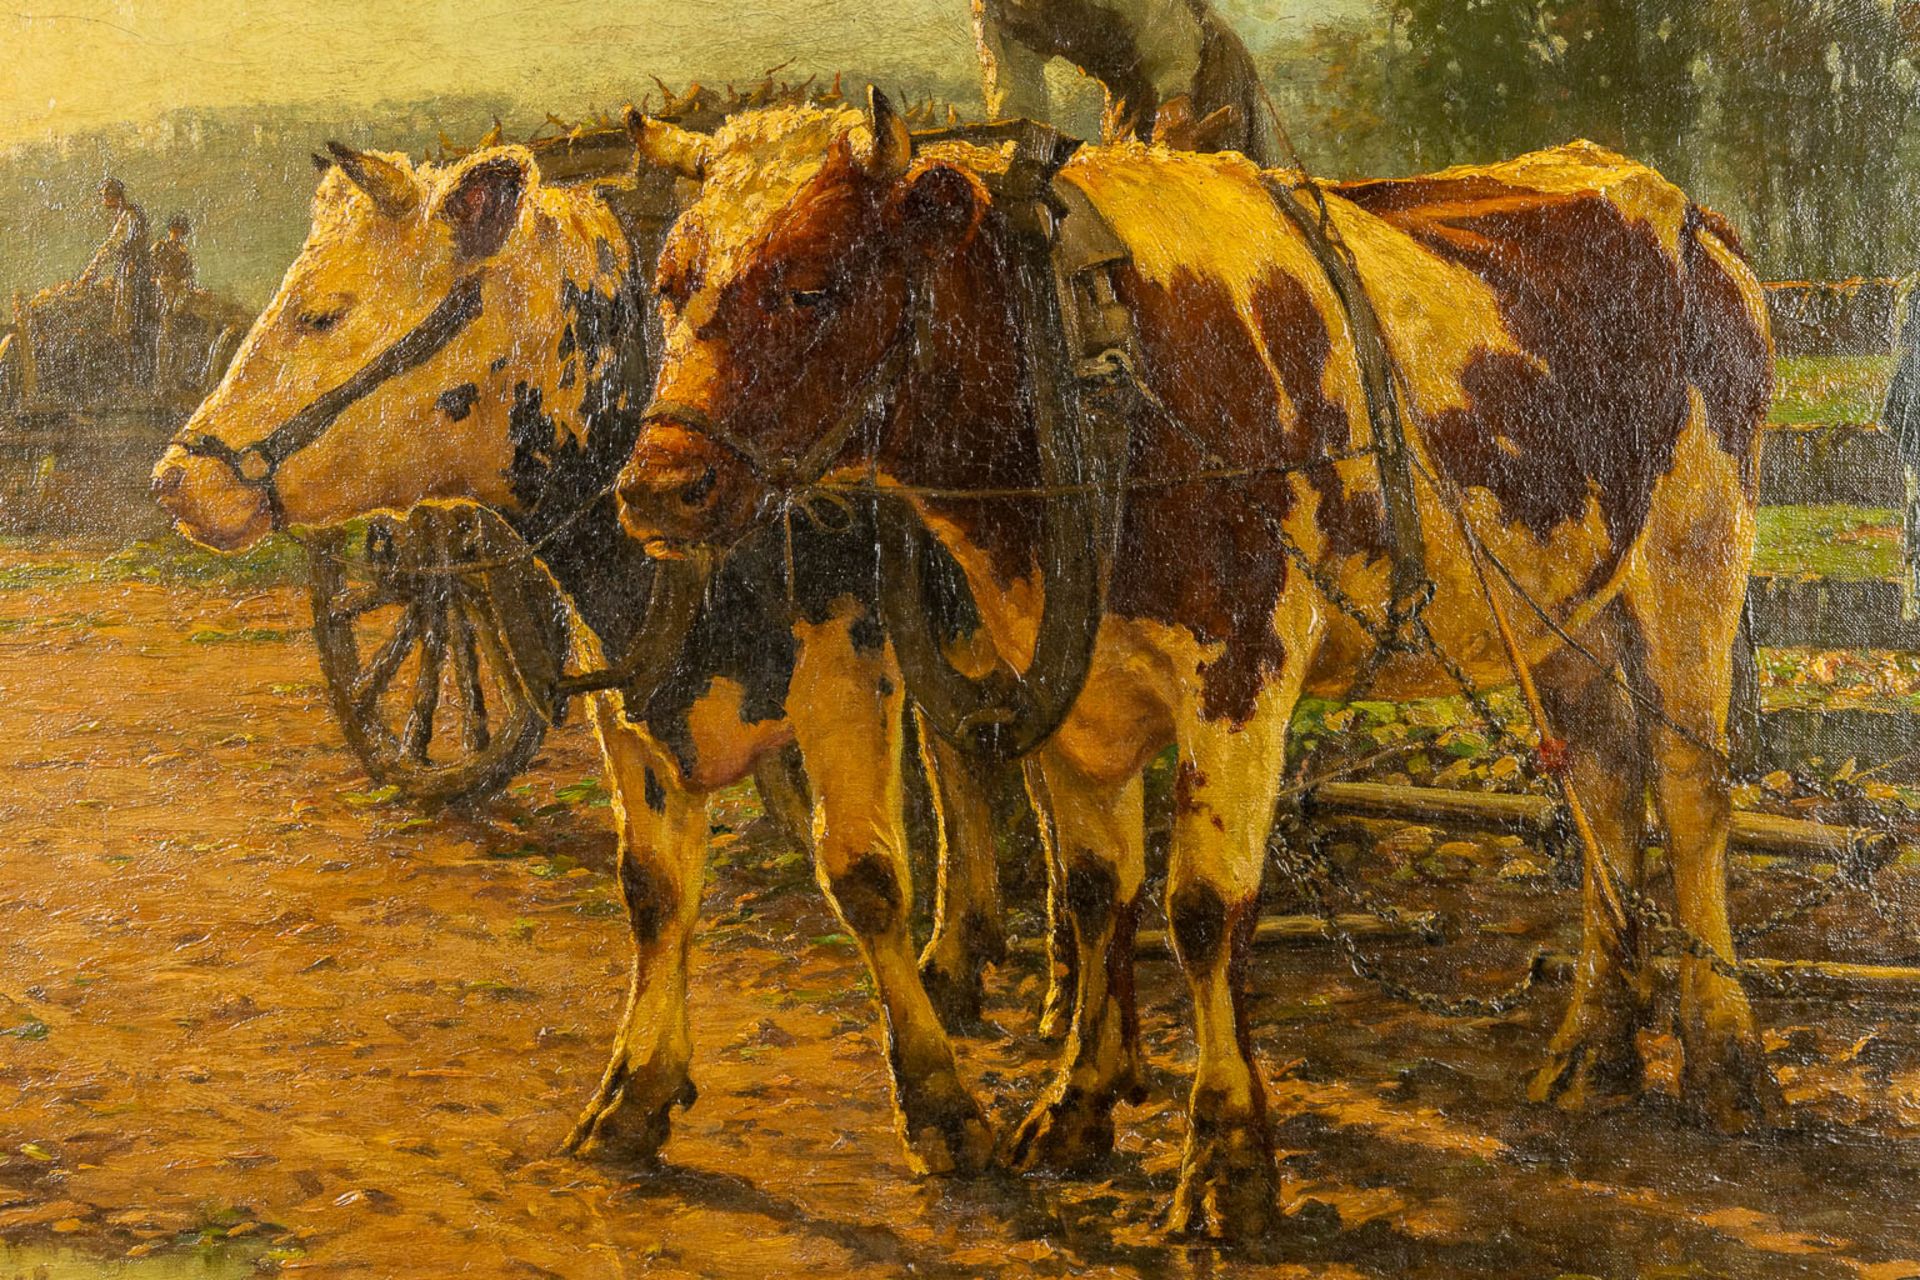 Adolphe JACOBS (1859-1940) 'Cattle hauling a cart' oil on canvas. (W:92 x H:71 cm) - Image 5 of 9